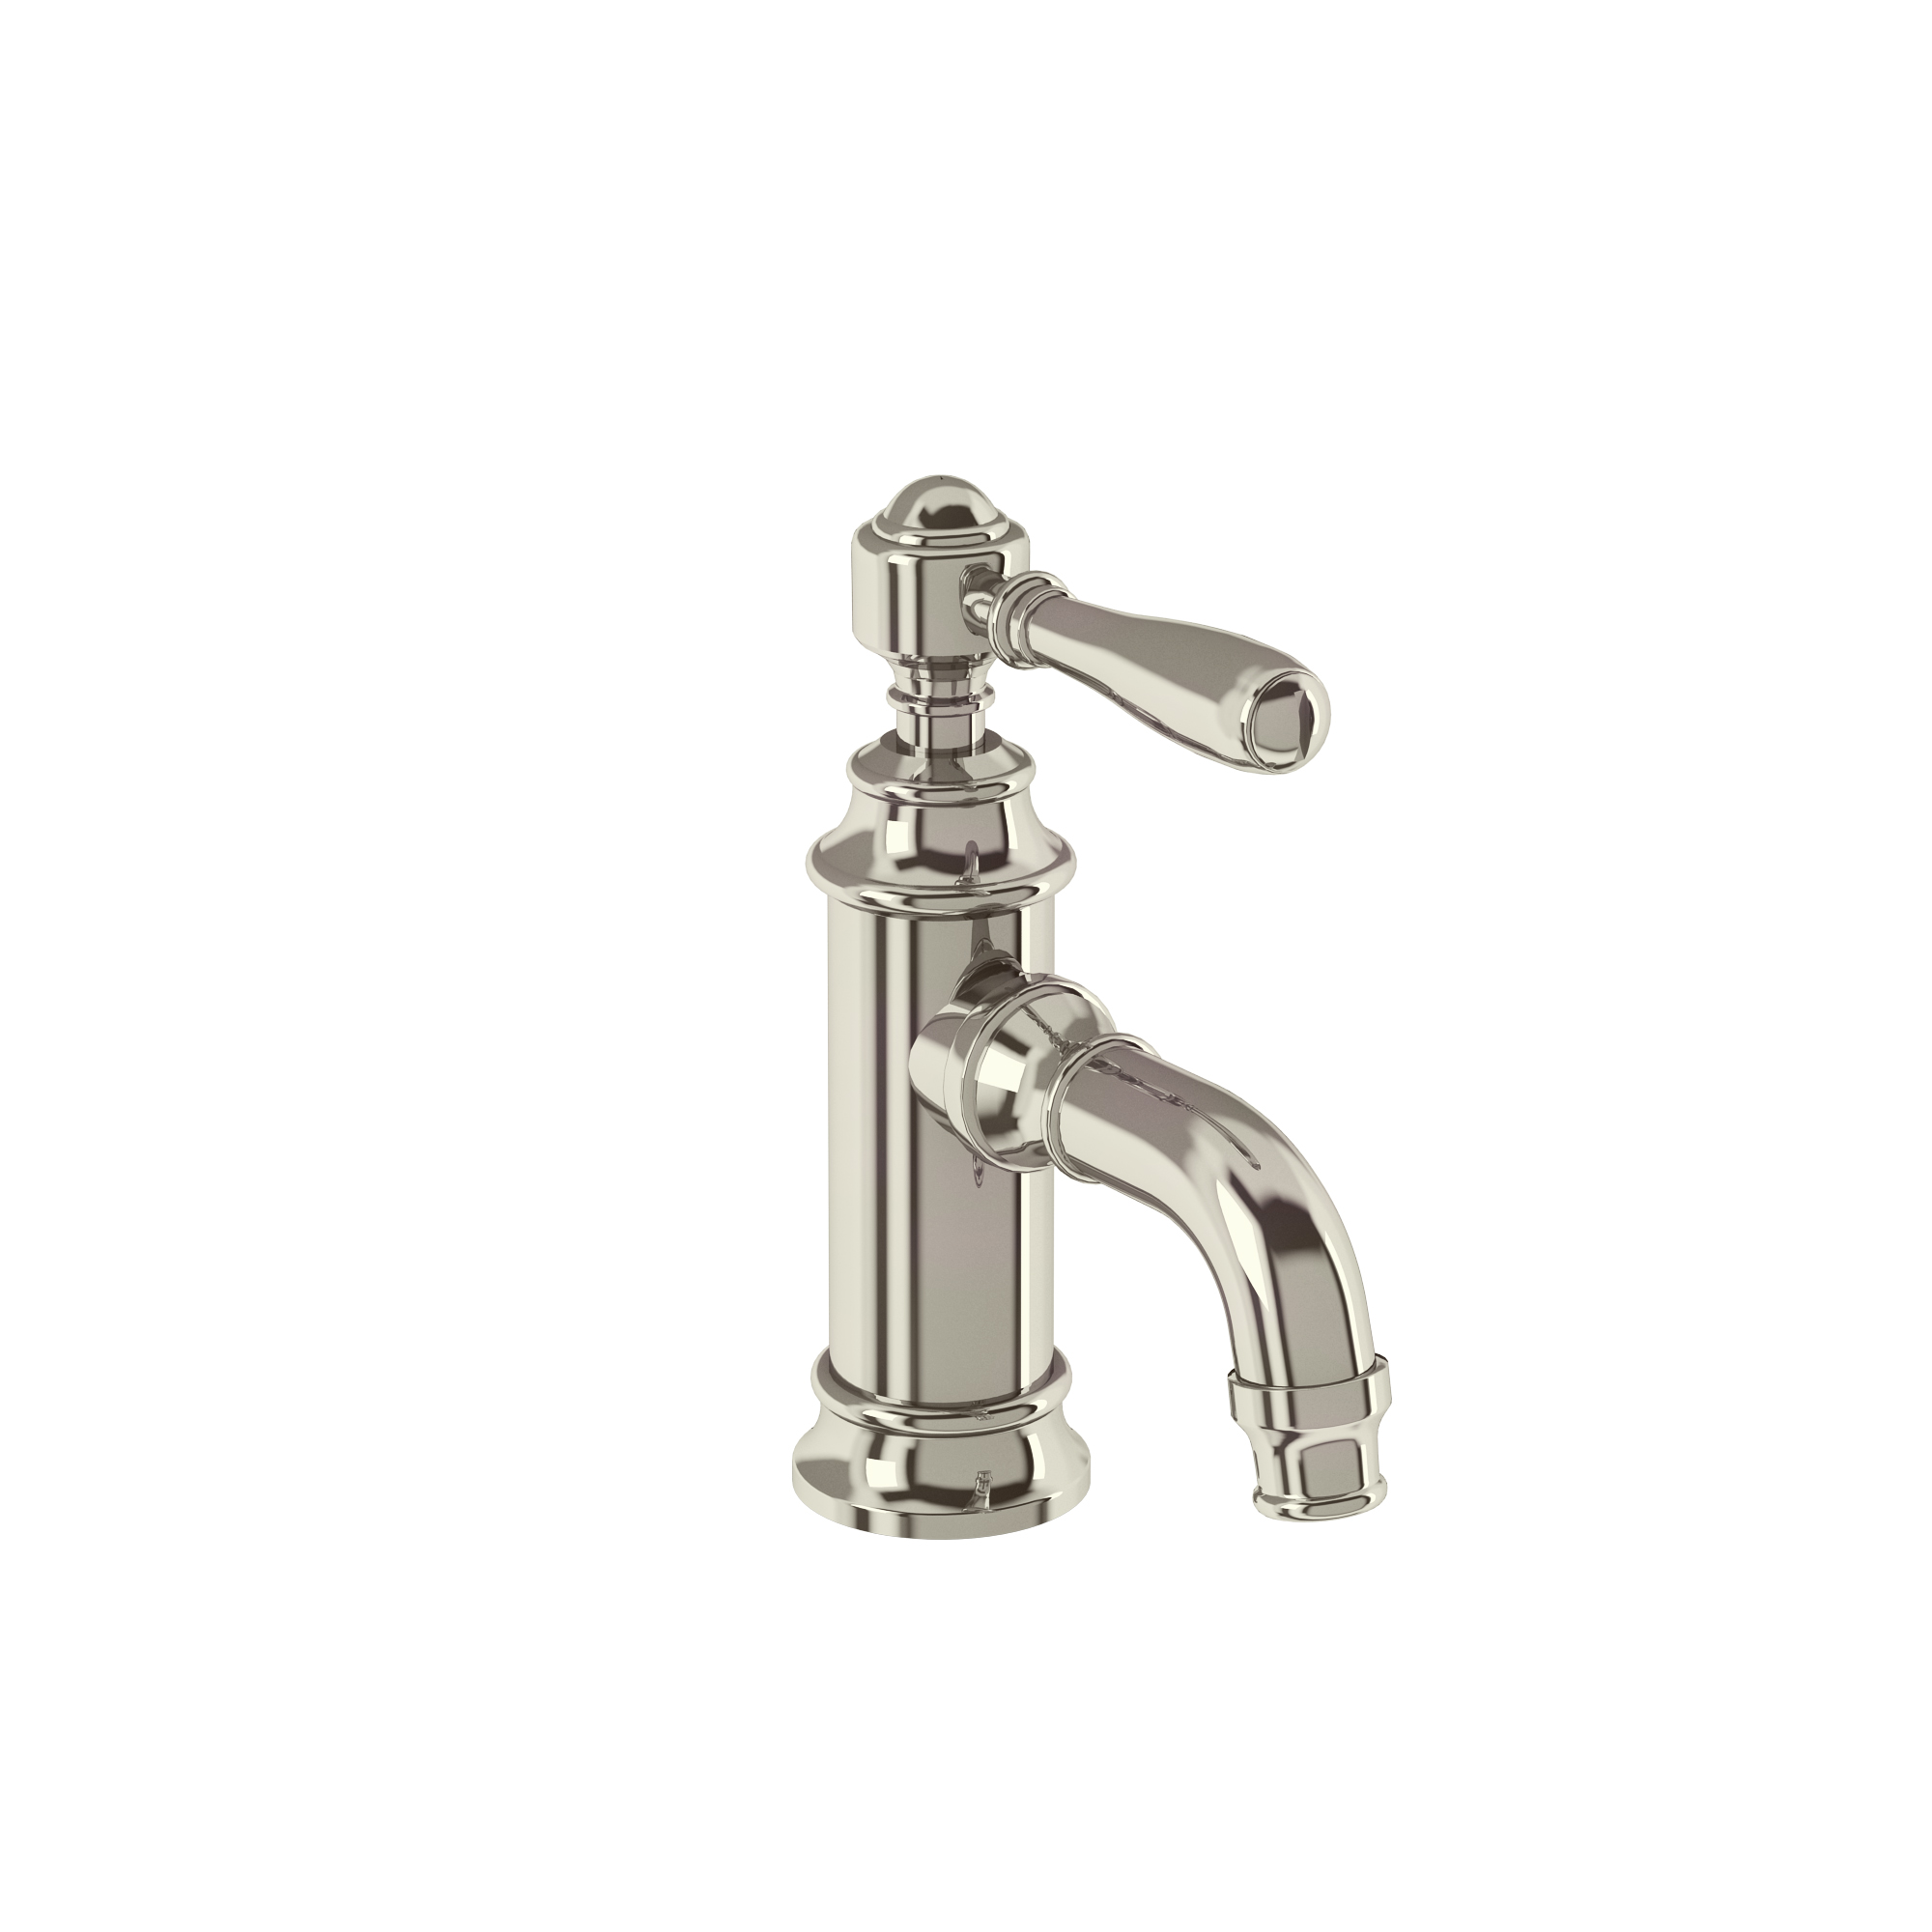 Arcade Mini single-lever basin mixer without pop up waste - nickel - with brass lever